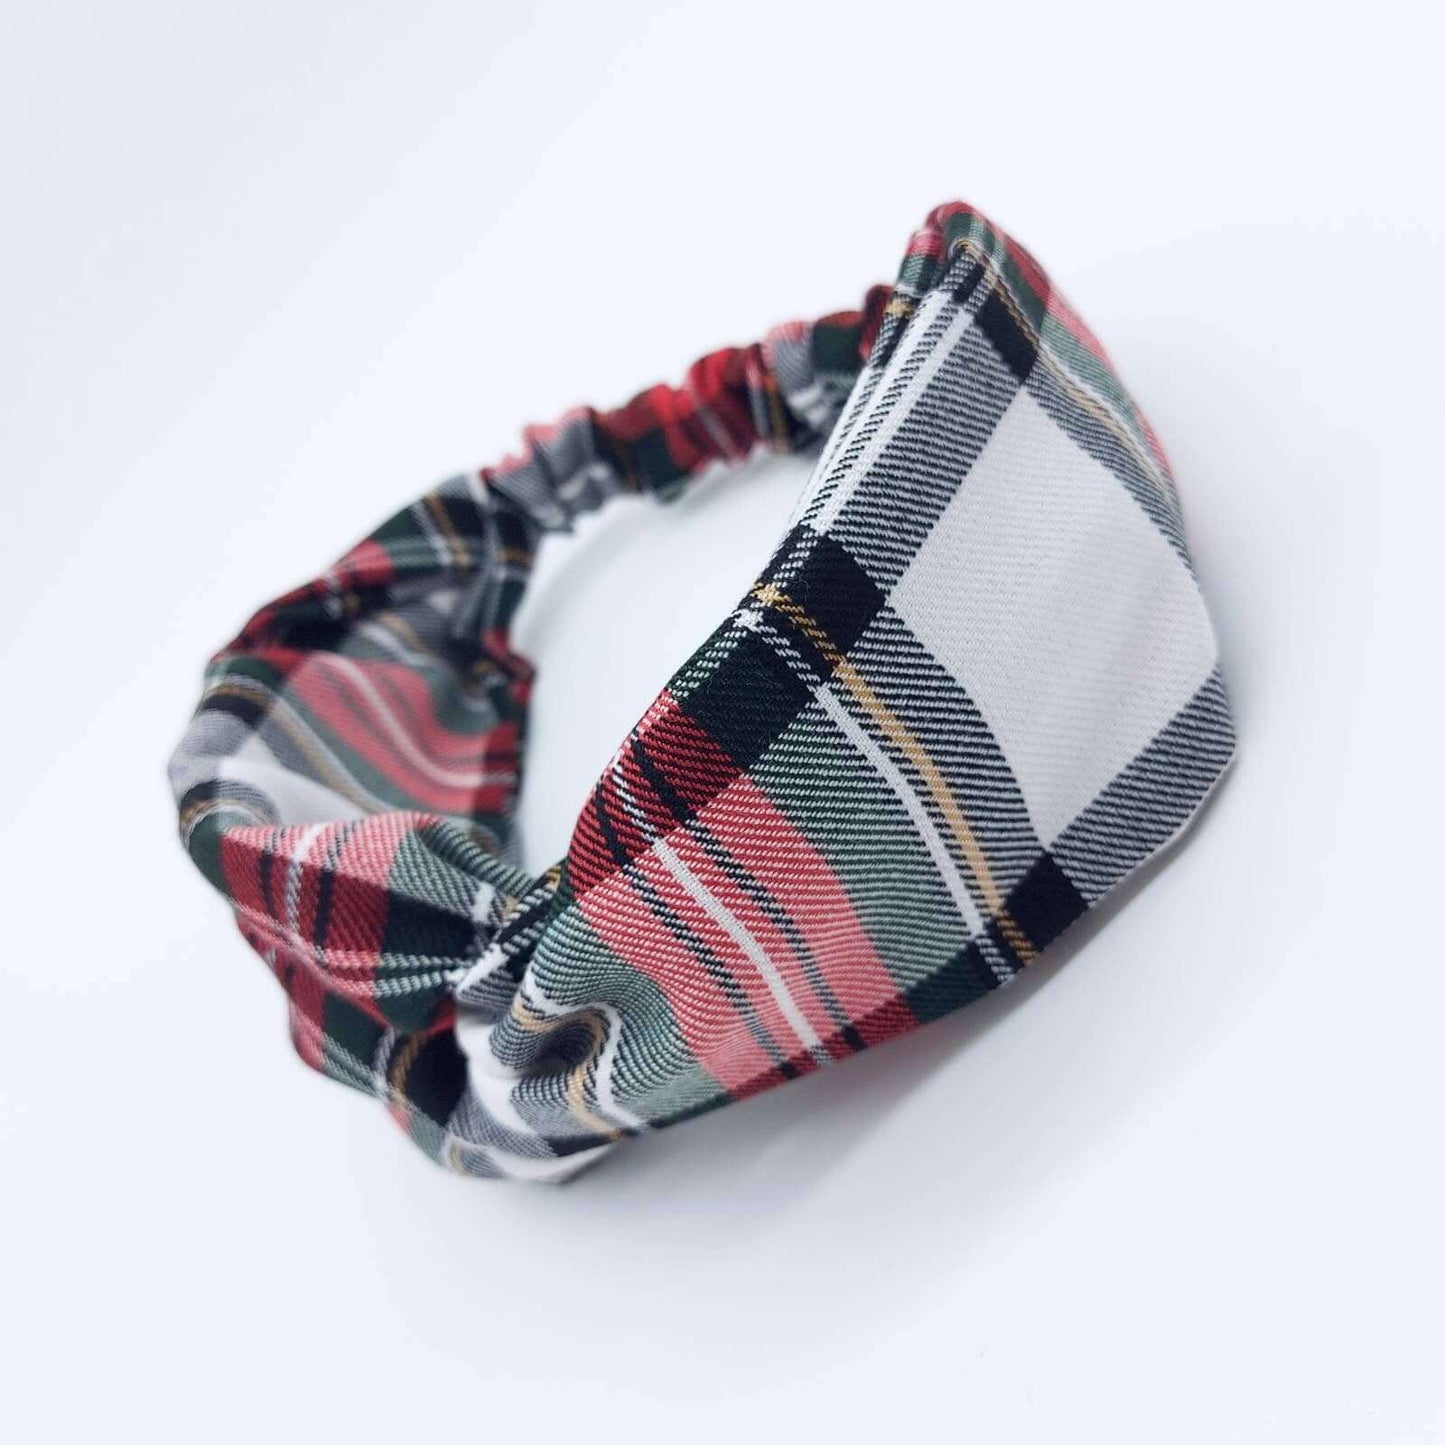 A soft, red and white, plaid tartan check, elasticated fabric headband, with a turban twist design at the front.